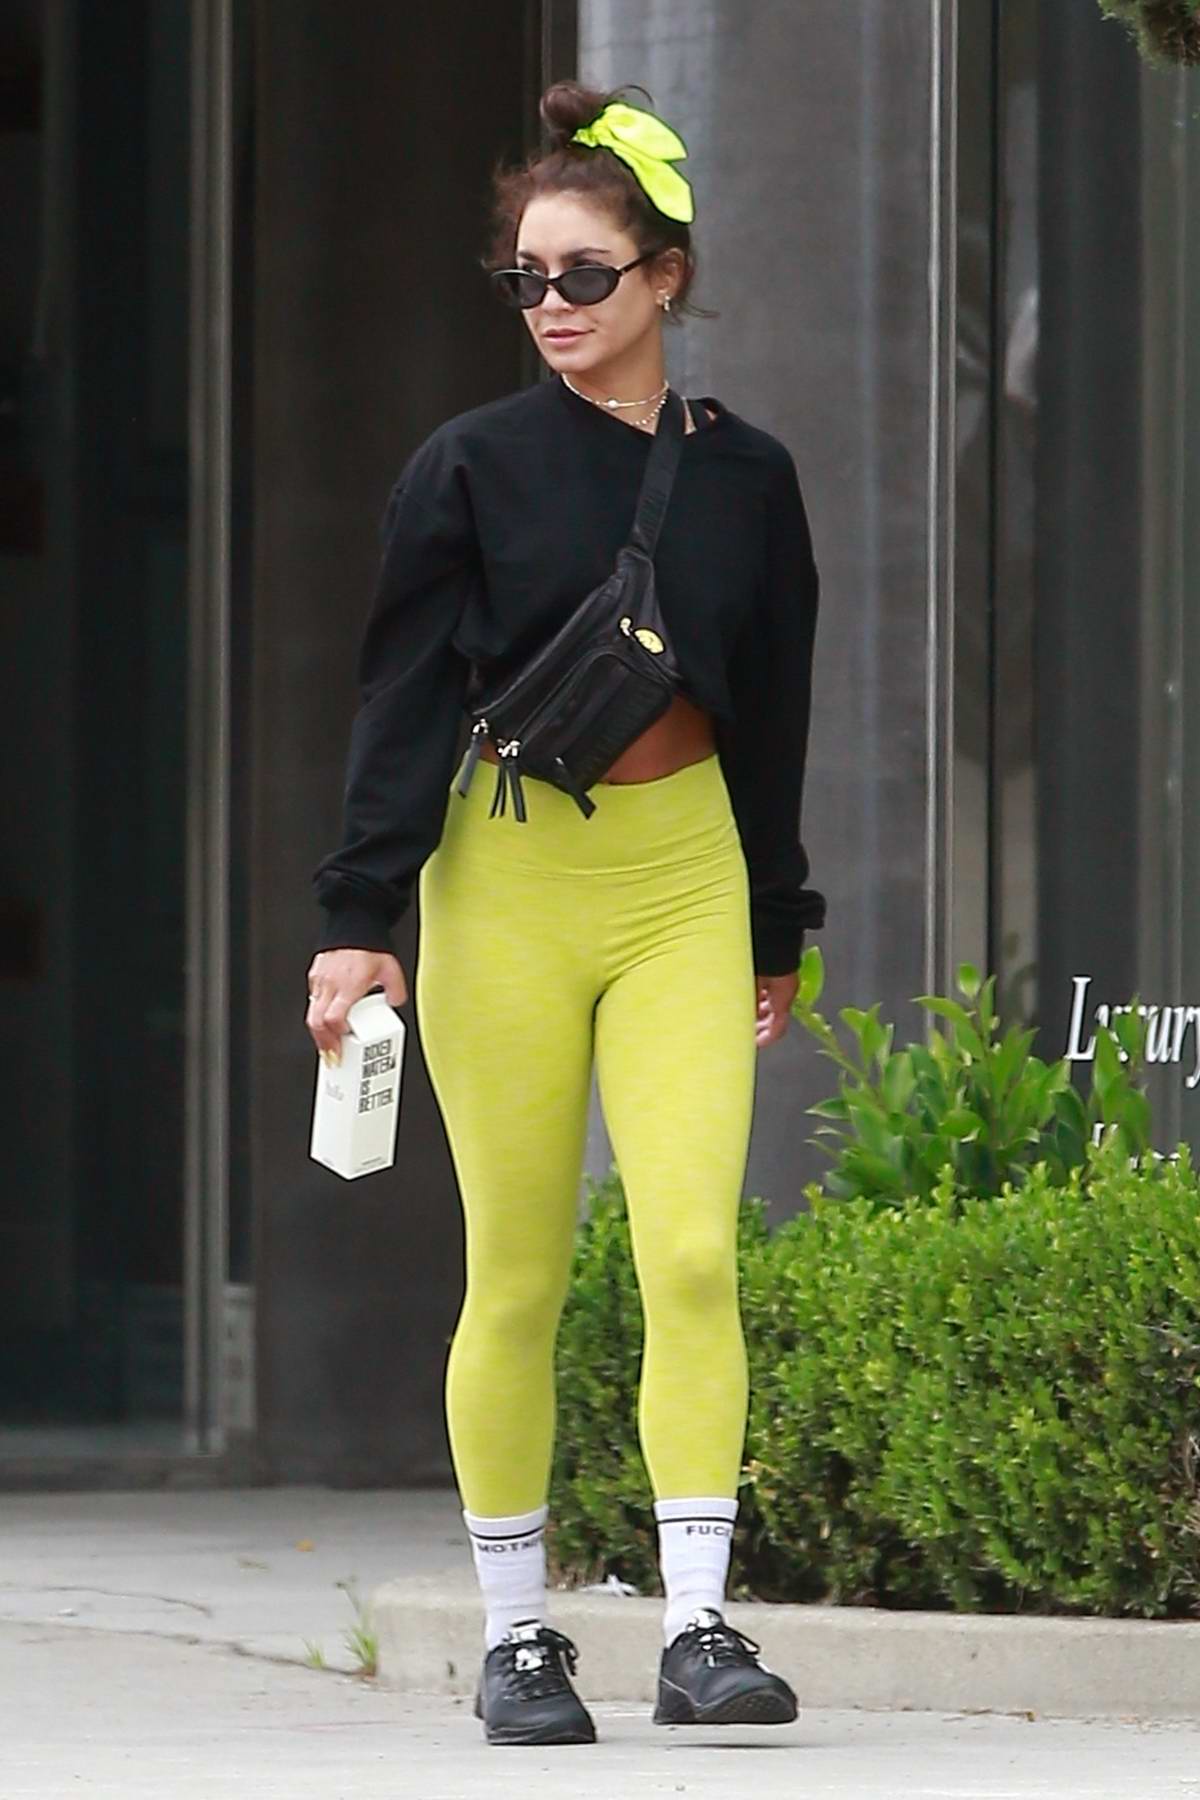 Vanessa Hudgens Shows Off Her Toned Legs In Green Leggings While Making 